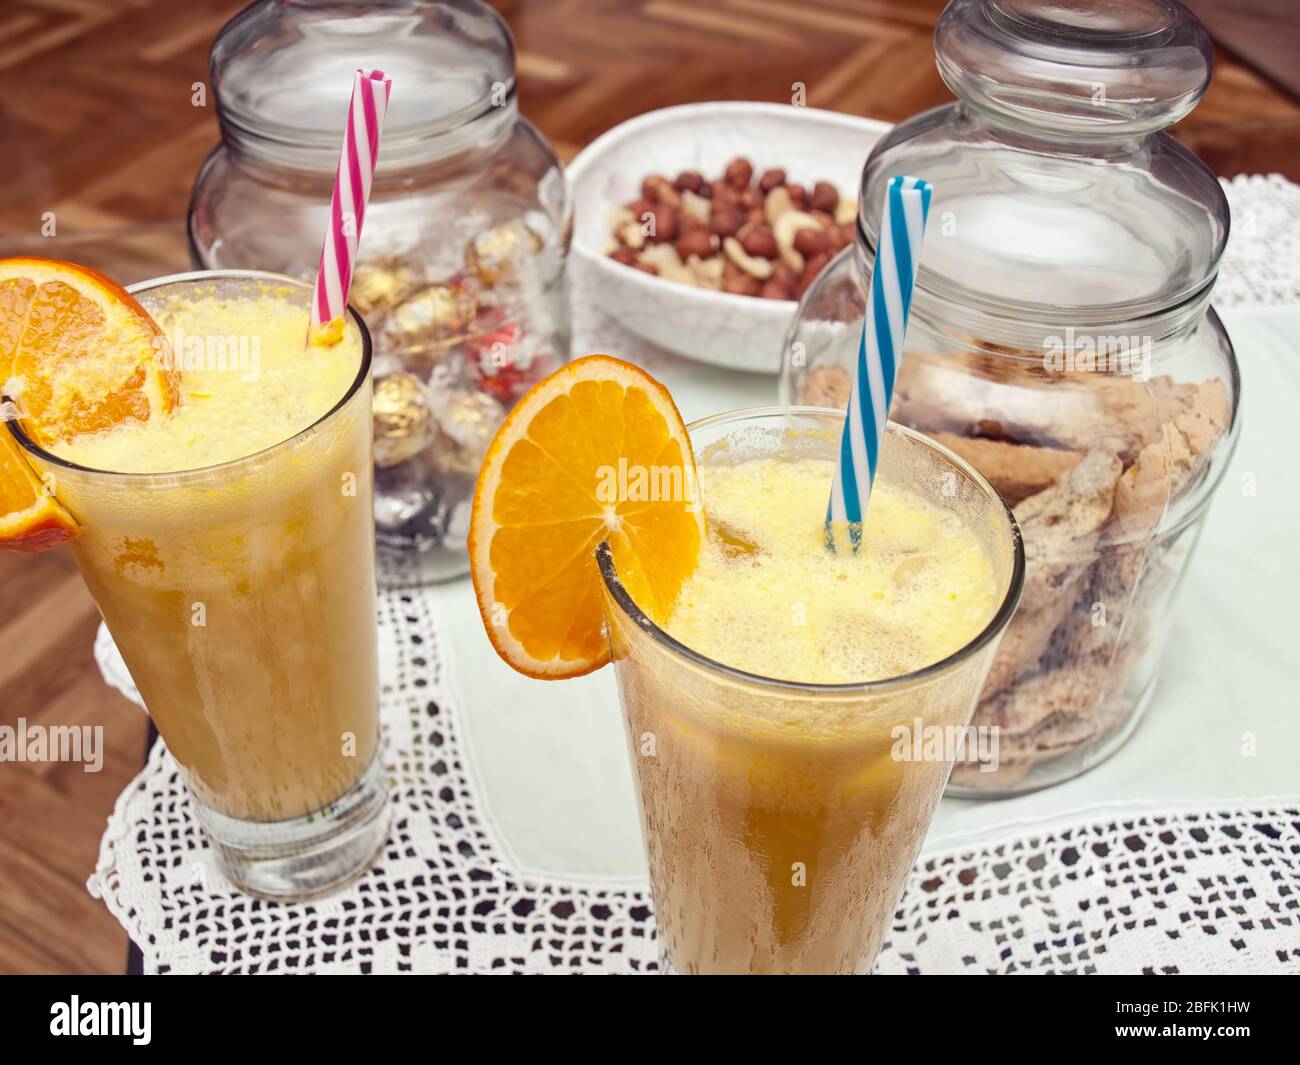 Homemade version of Pina Colada cocktails on the table. Stock Photo